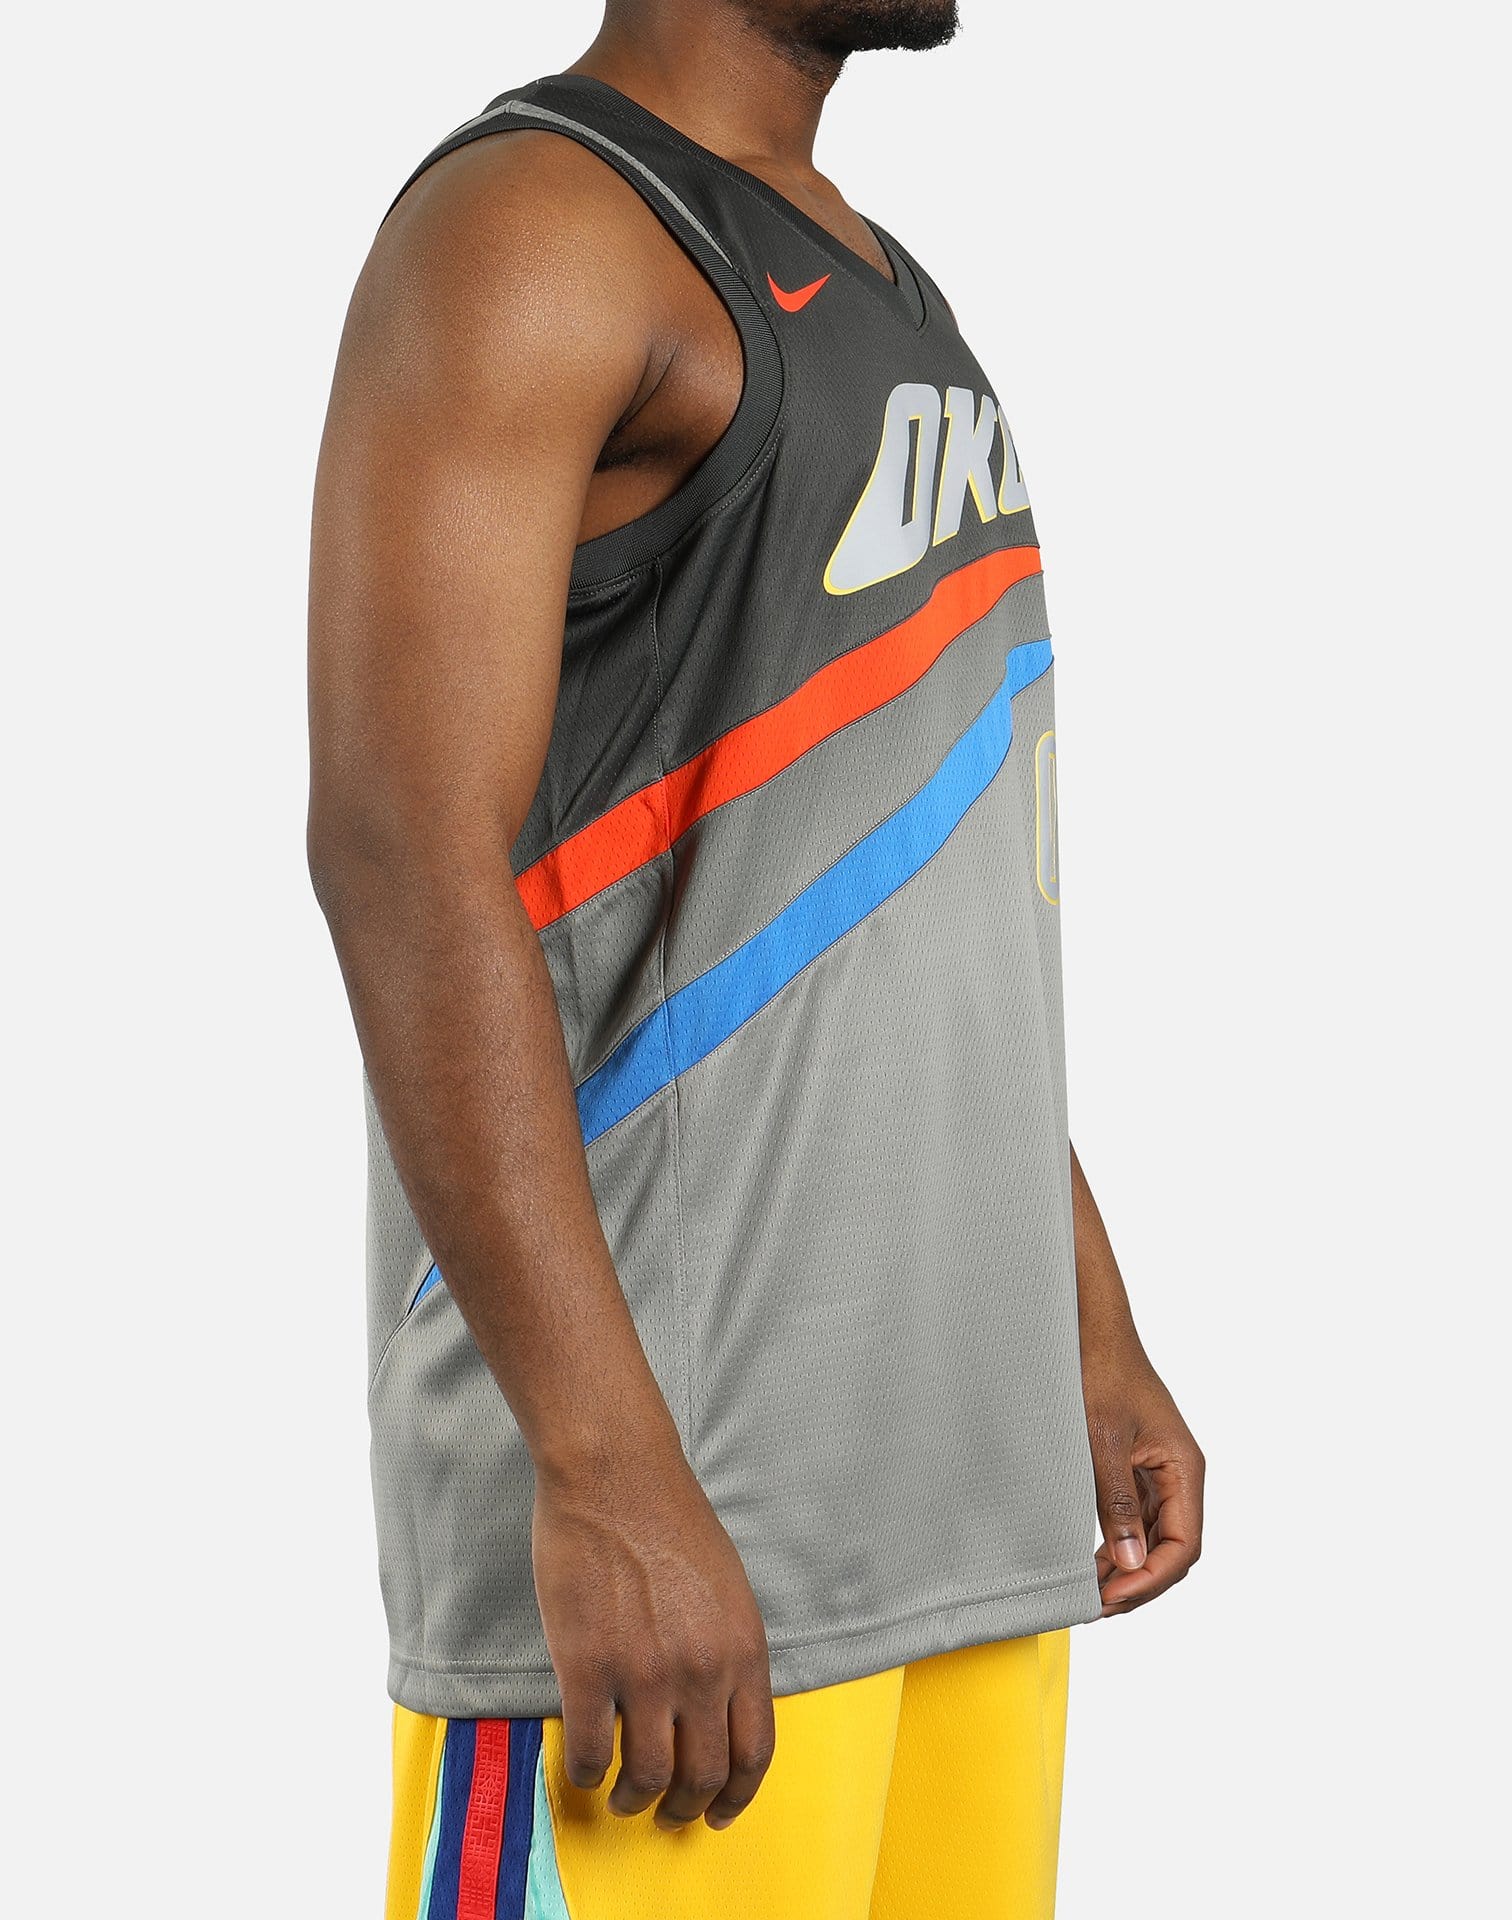 Oklahoma City Thunder Nike Icon Authentic Jersey - Russell